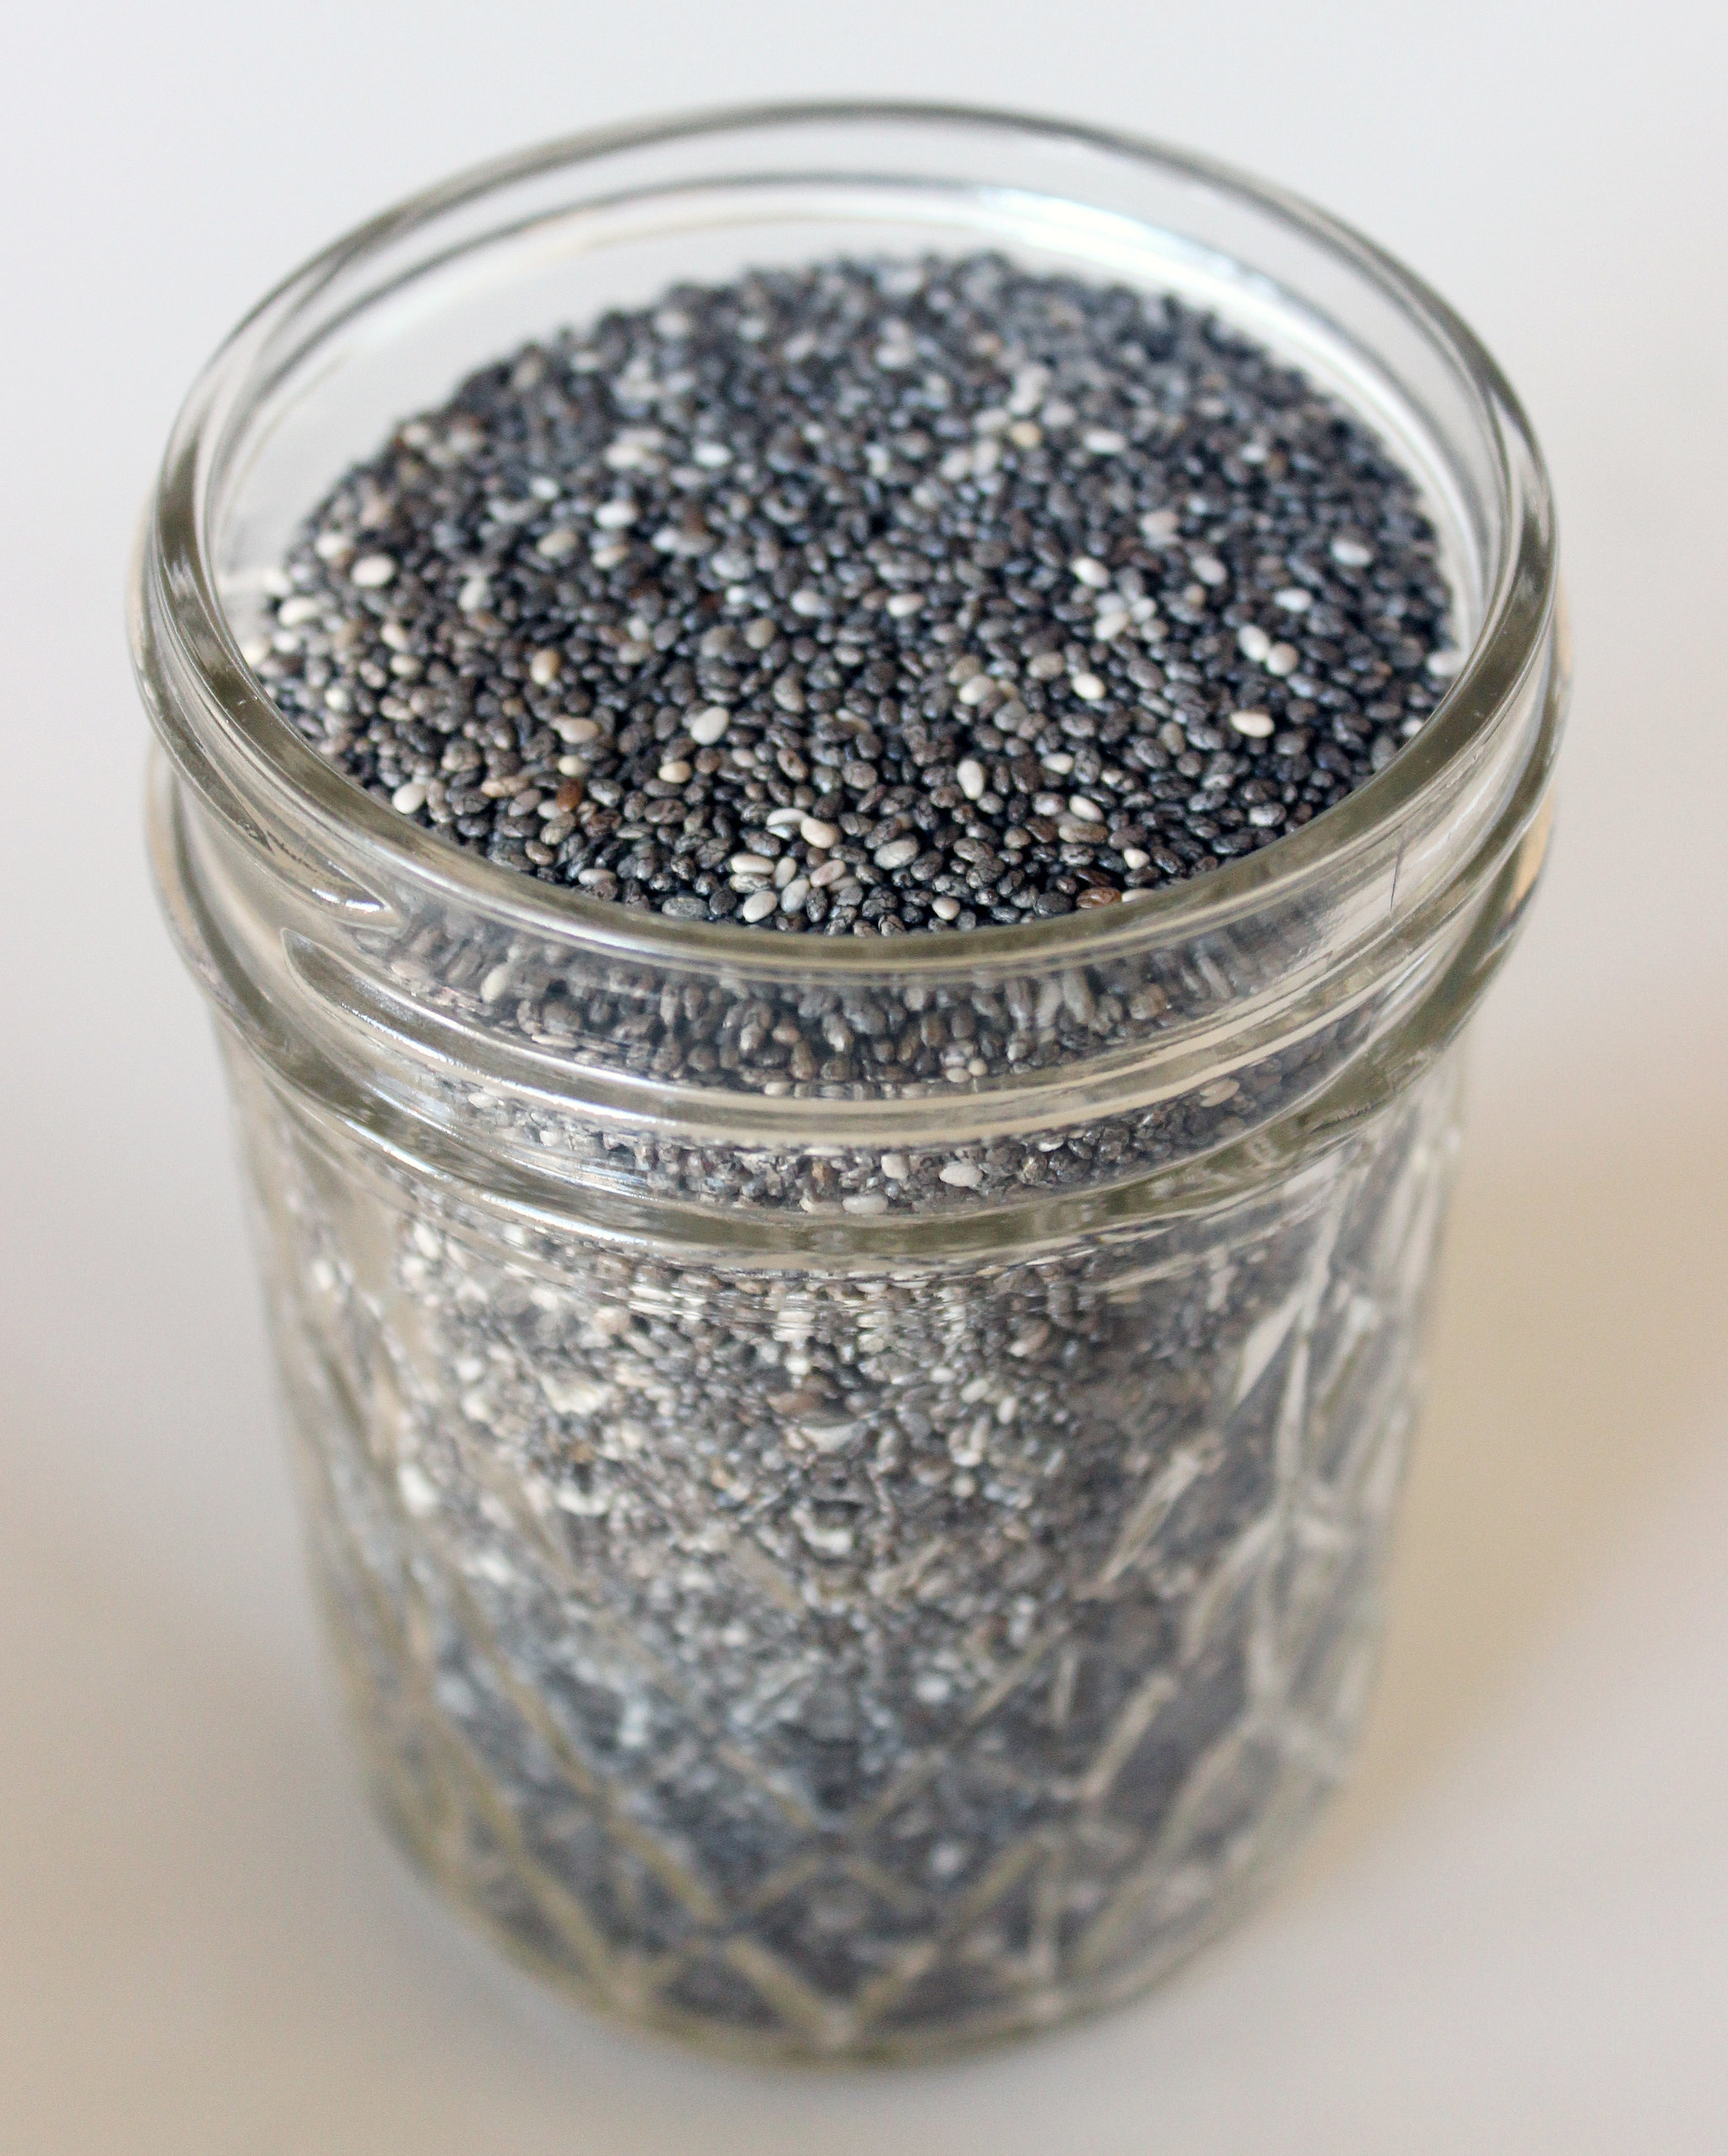 The Right and Wrong Way to Eat Chia Seeds For Health